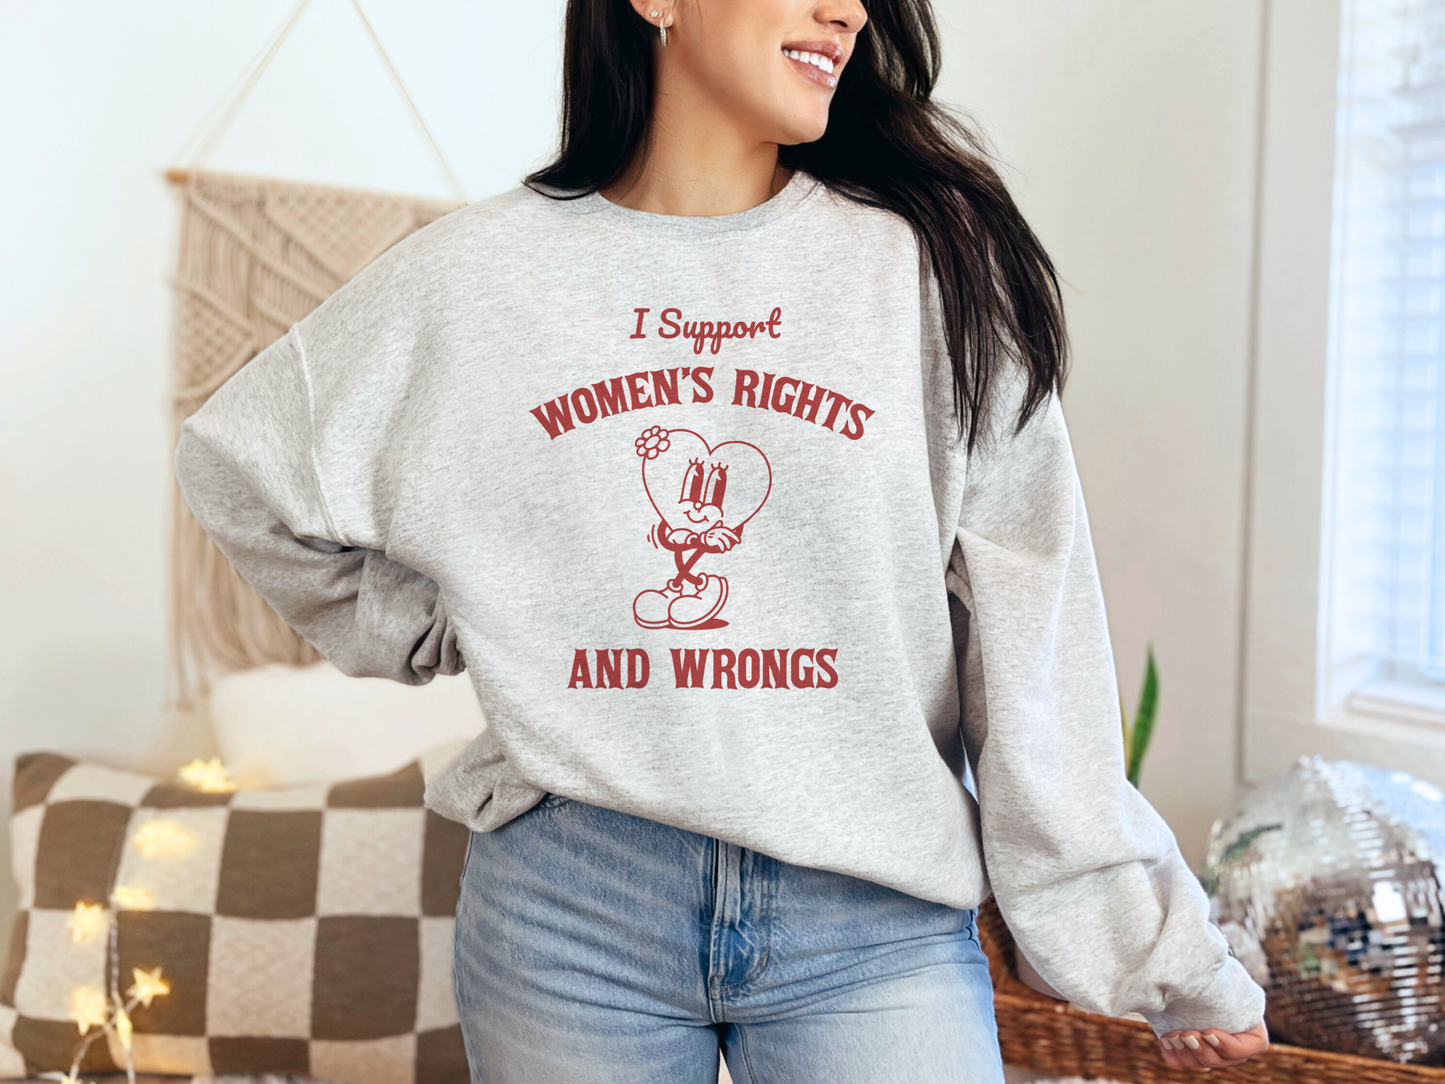 I Support Women’s Rights And Wrongs Graphic T-Shirt or Sweatshirt